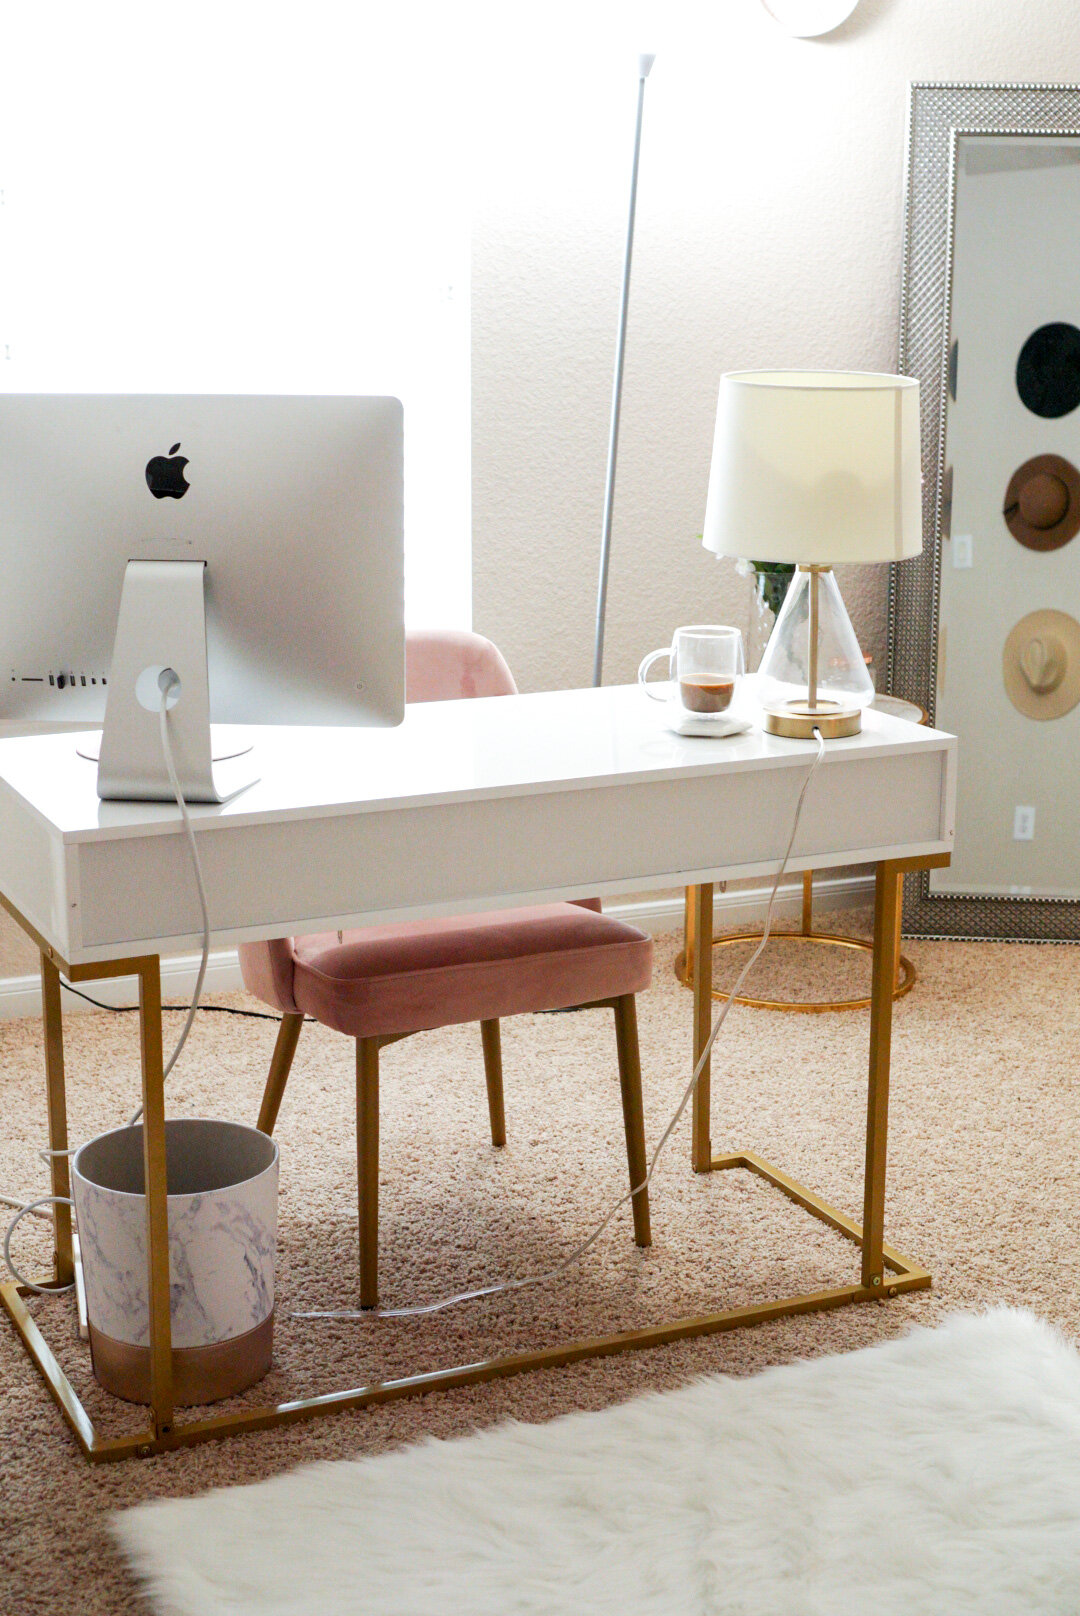 My Home Office Decor On a Budget — Avery Carrier | Fashion ...